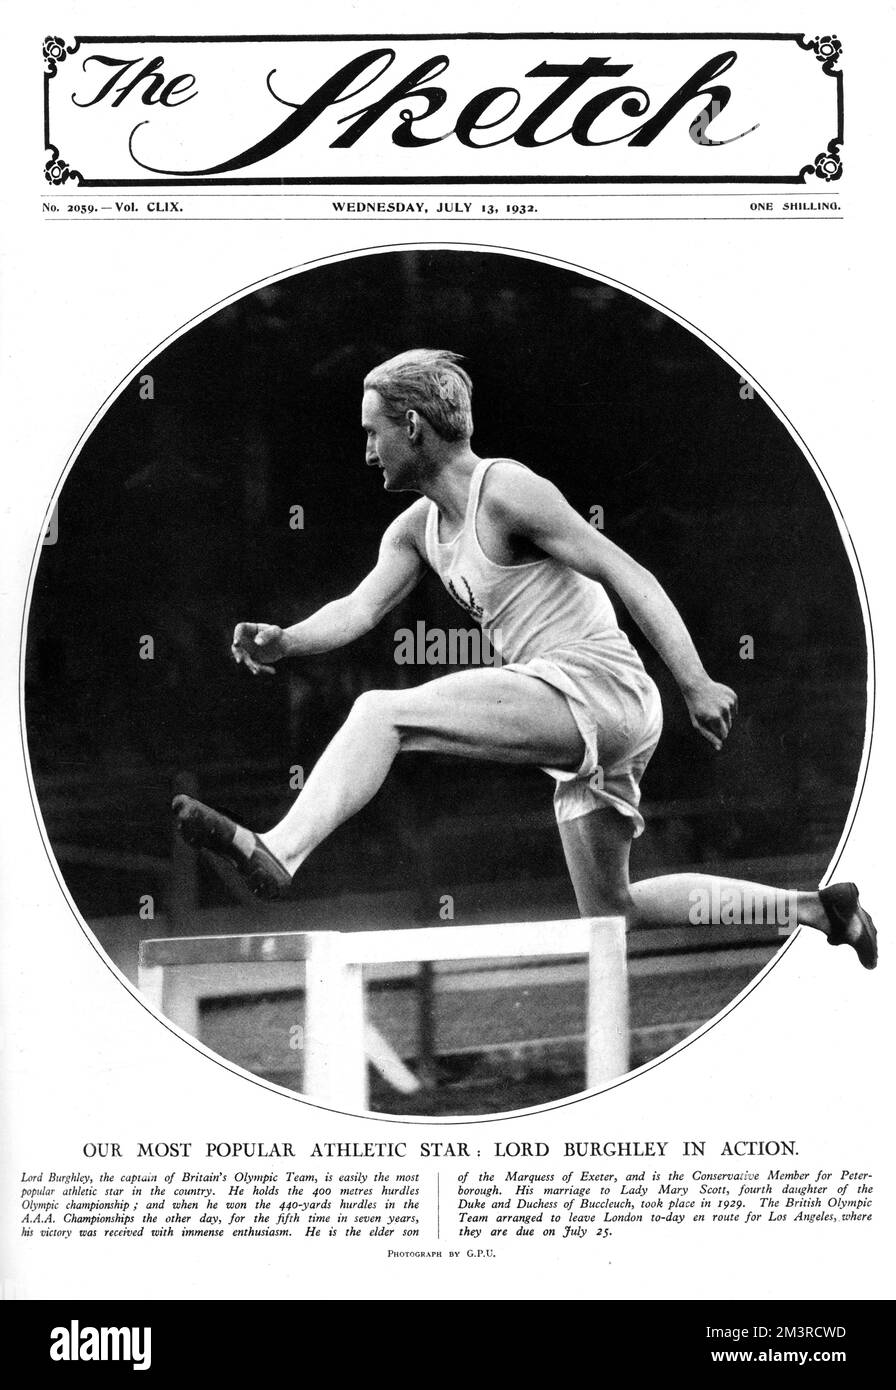 Lord Burghley, captain of Britain's Olympic team in 1932 jumping hurdles in a photograph on the front cover of The Sketch.  David George Brownlow Cecil, 6th Marquess of Exeter (1905 - 1981), Lord Burghley was an athlete, sports official and Conservative party politician As an athlete, Burghley was a very keen practitioner who placed matchboxes on hurdles and practised knocking over the matchboxes with his lead foot without touching the hurdle. In 1927, his final year at Magdalene College, Cambridge, he amazed colleagues by sprinting around the Great Court at Trinity College in the time it took Stock Photo